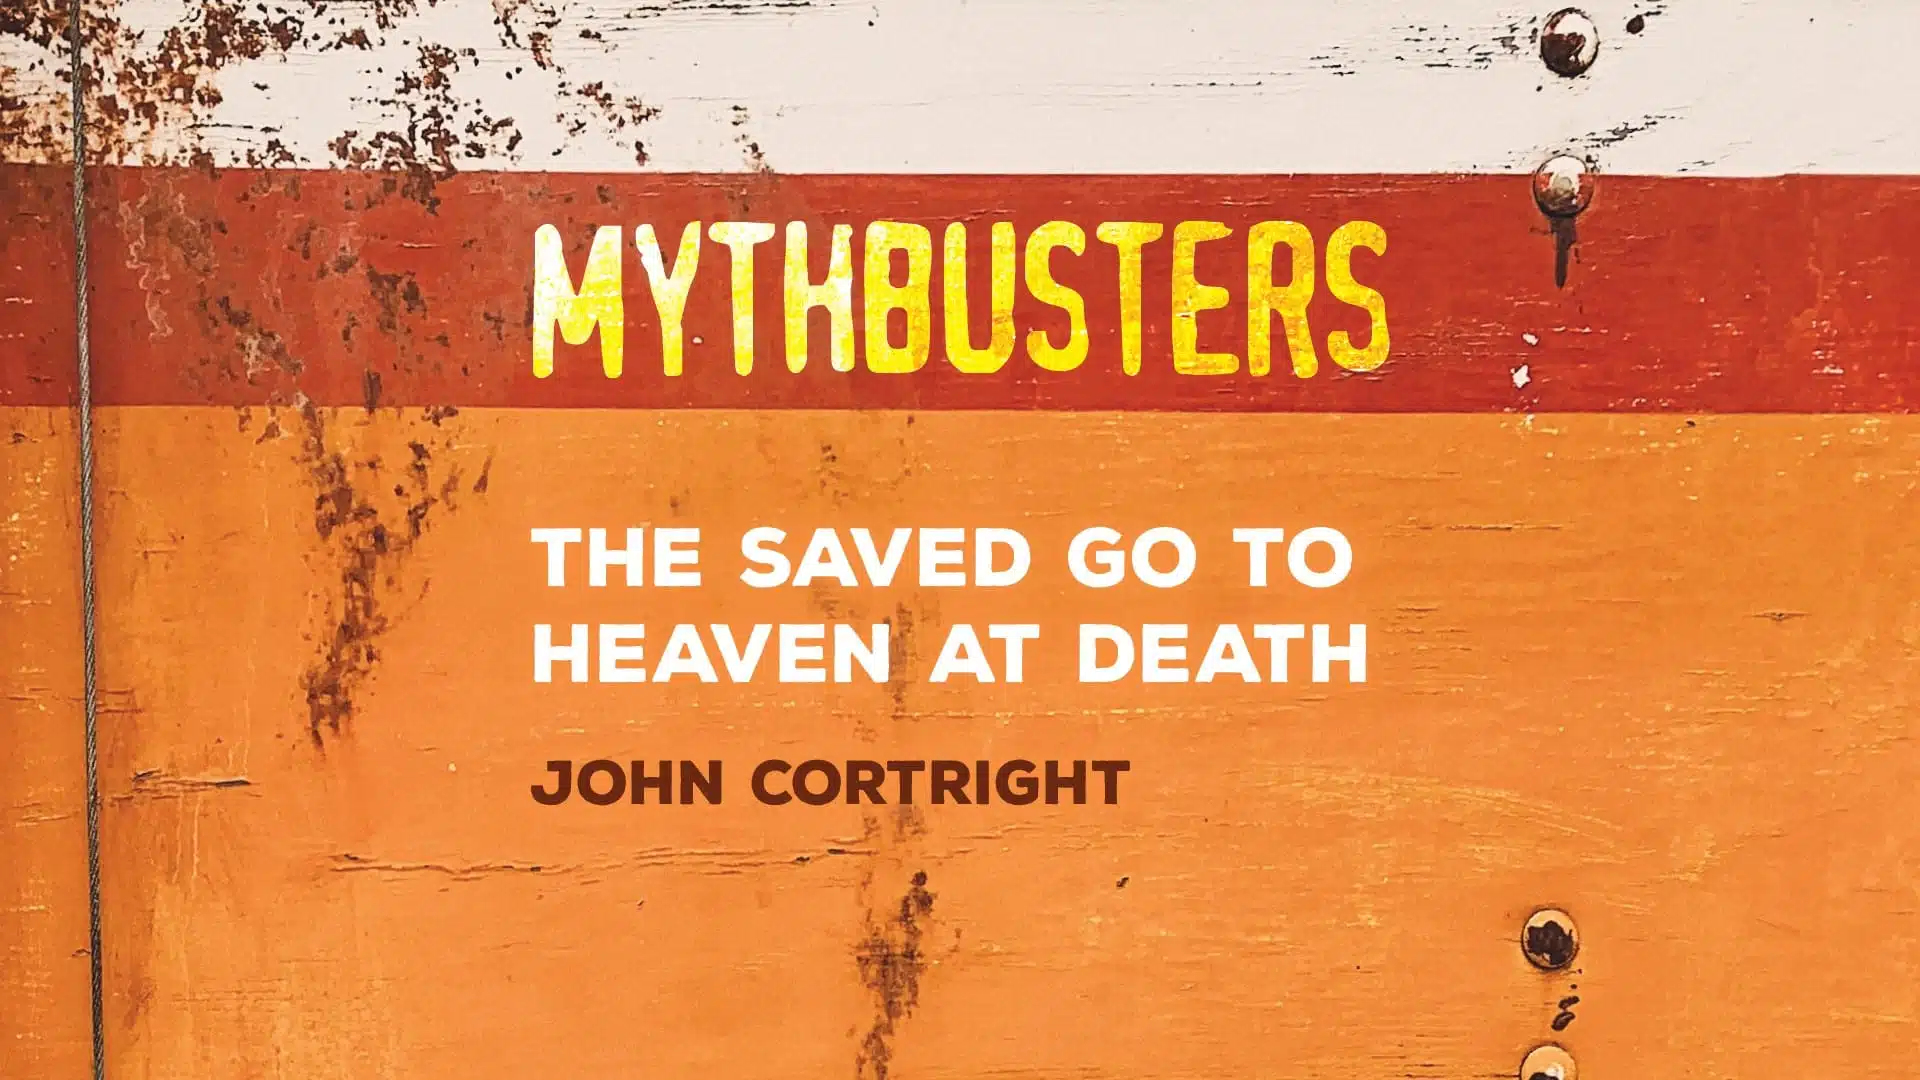 Myth: The Saved Go to Heaven at Death